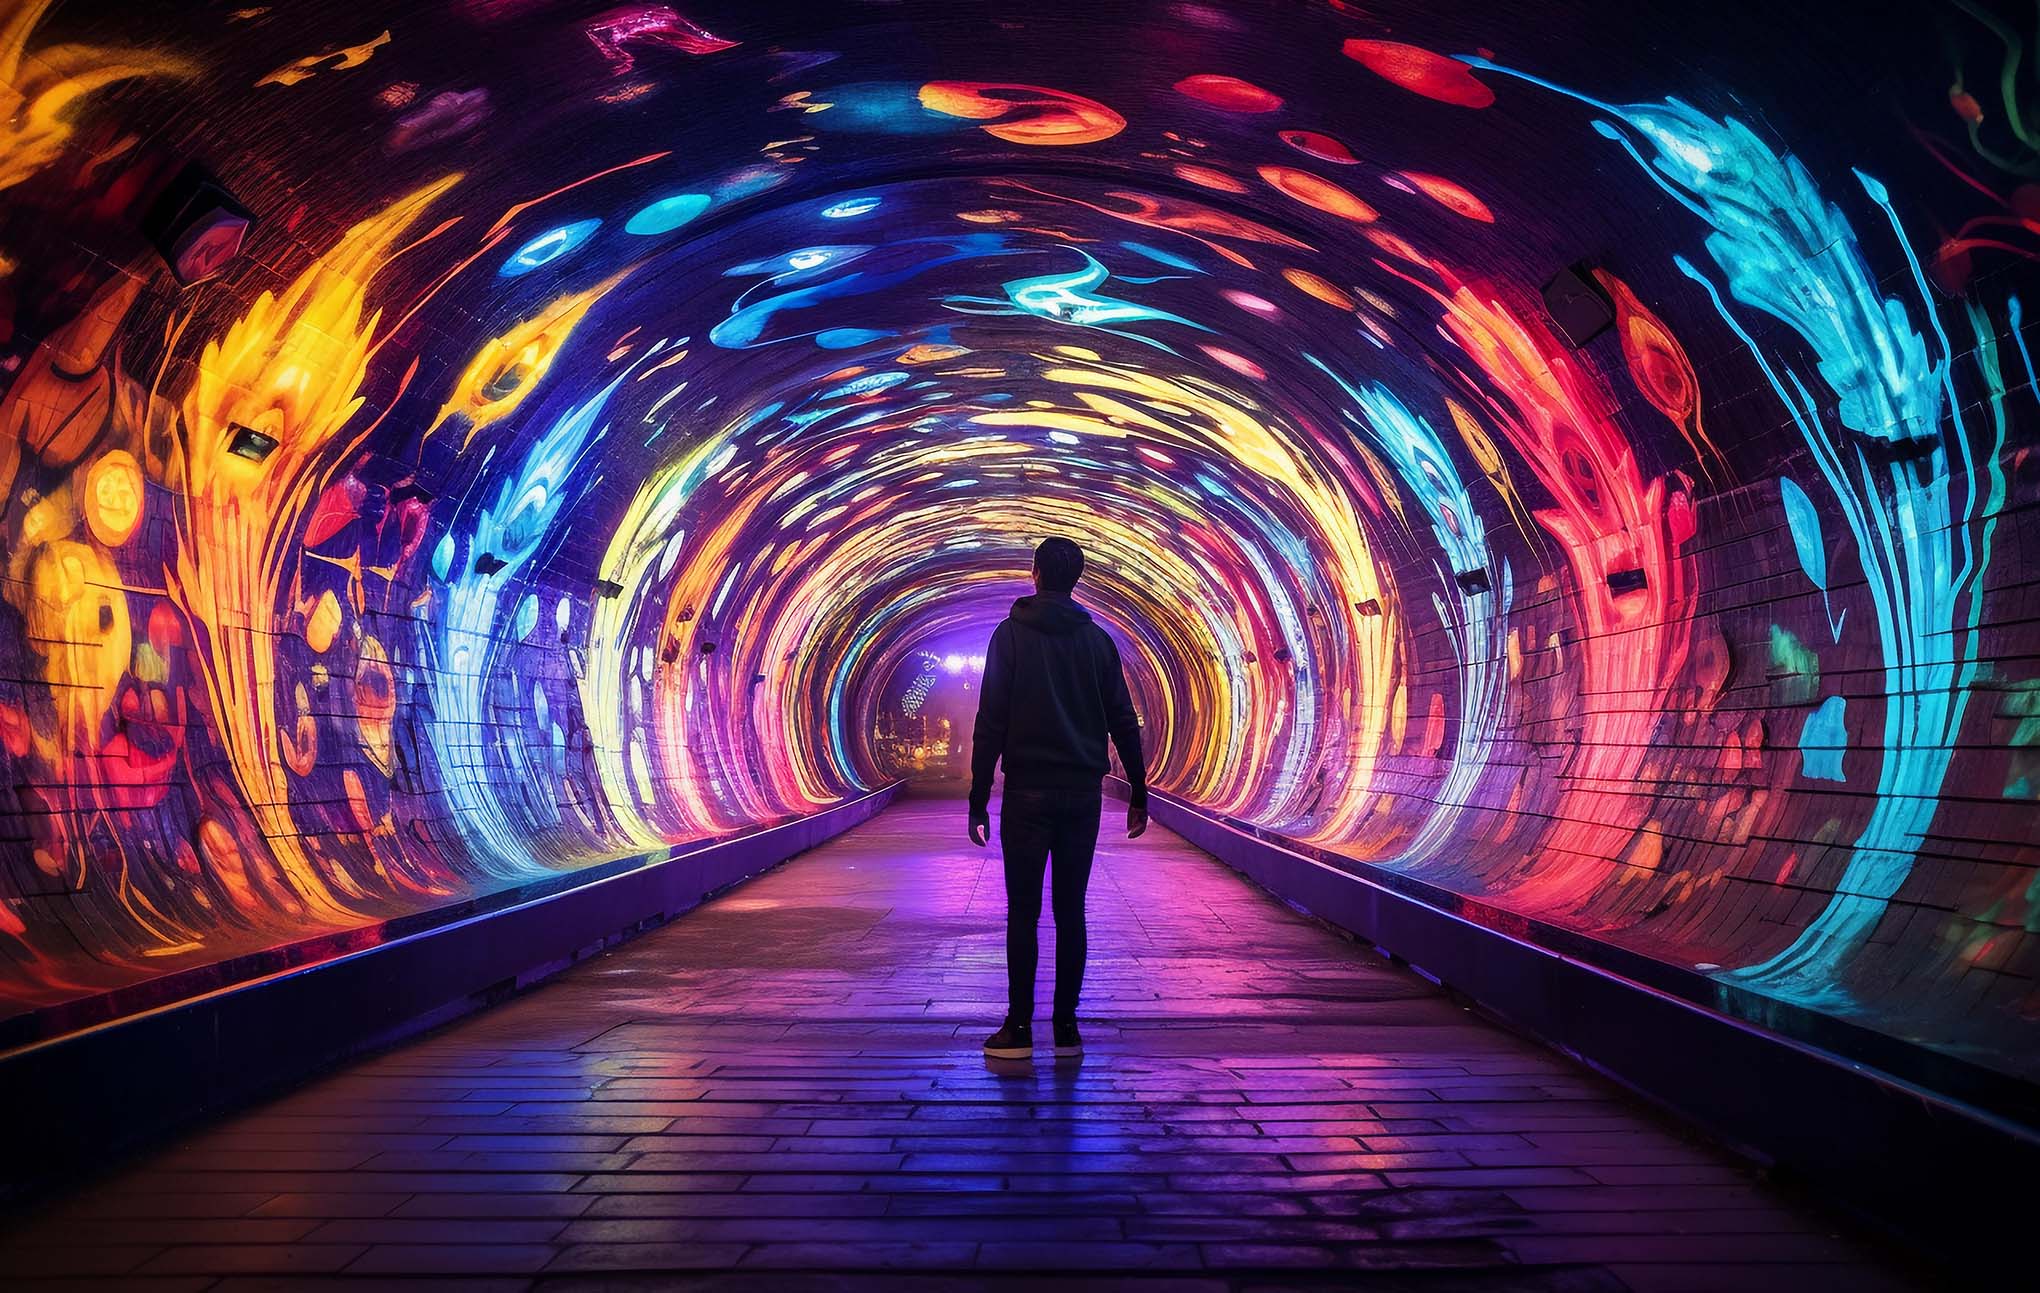 A person stands in a vibrant tunnel illuminated by colorful, abstract light patterns on the walls and ceiling, creating a vivid and immersive atmosphere. the floor is paved and the tunnel curves slightly ahead.